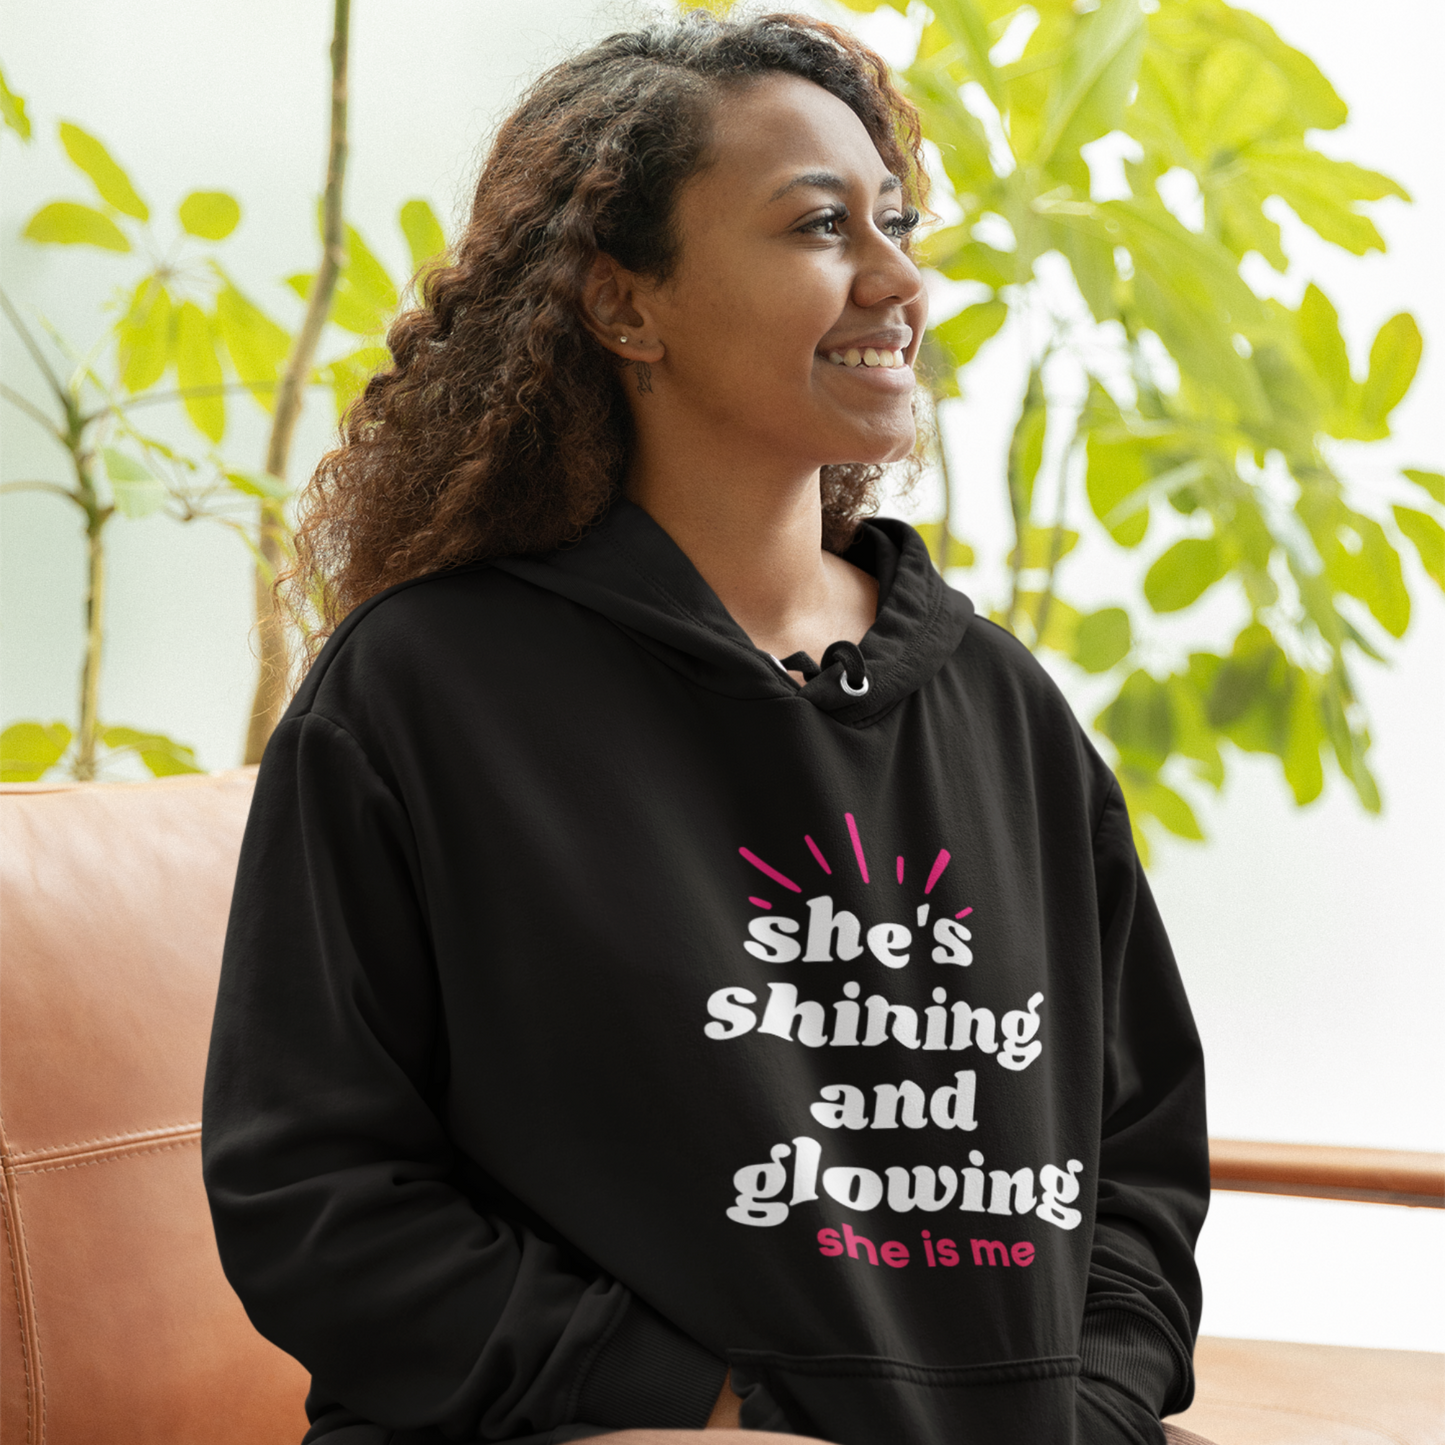 She’s Shining and Glowing: She is Me (Graphic White & Fuchsia Text) Unisex Heavy Blend Hoodie - Style: Gildan 18500